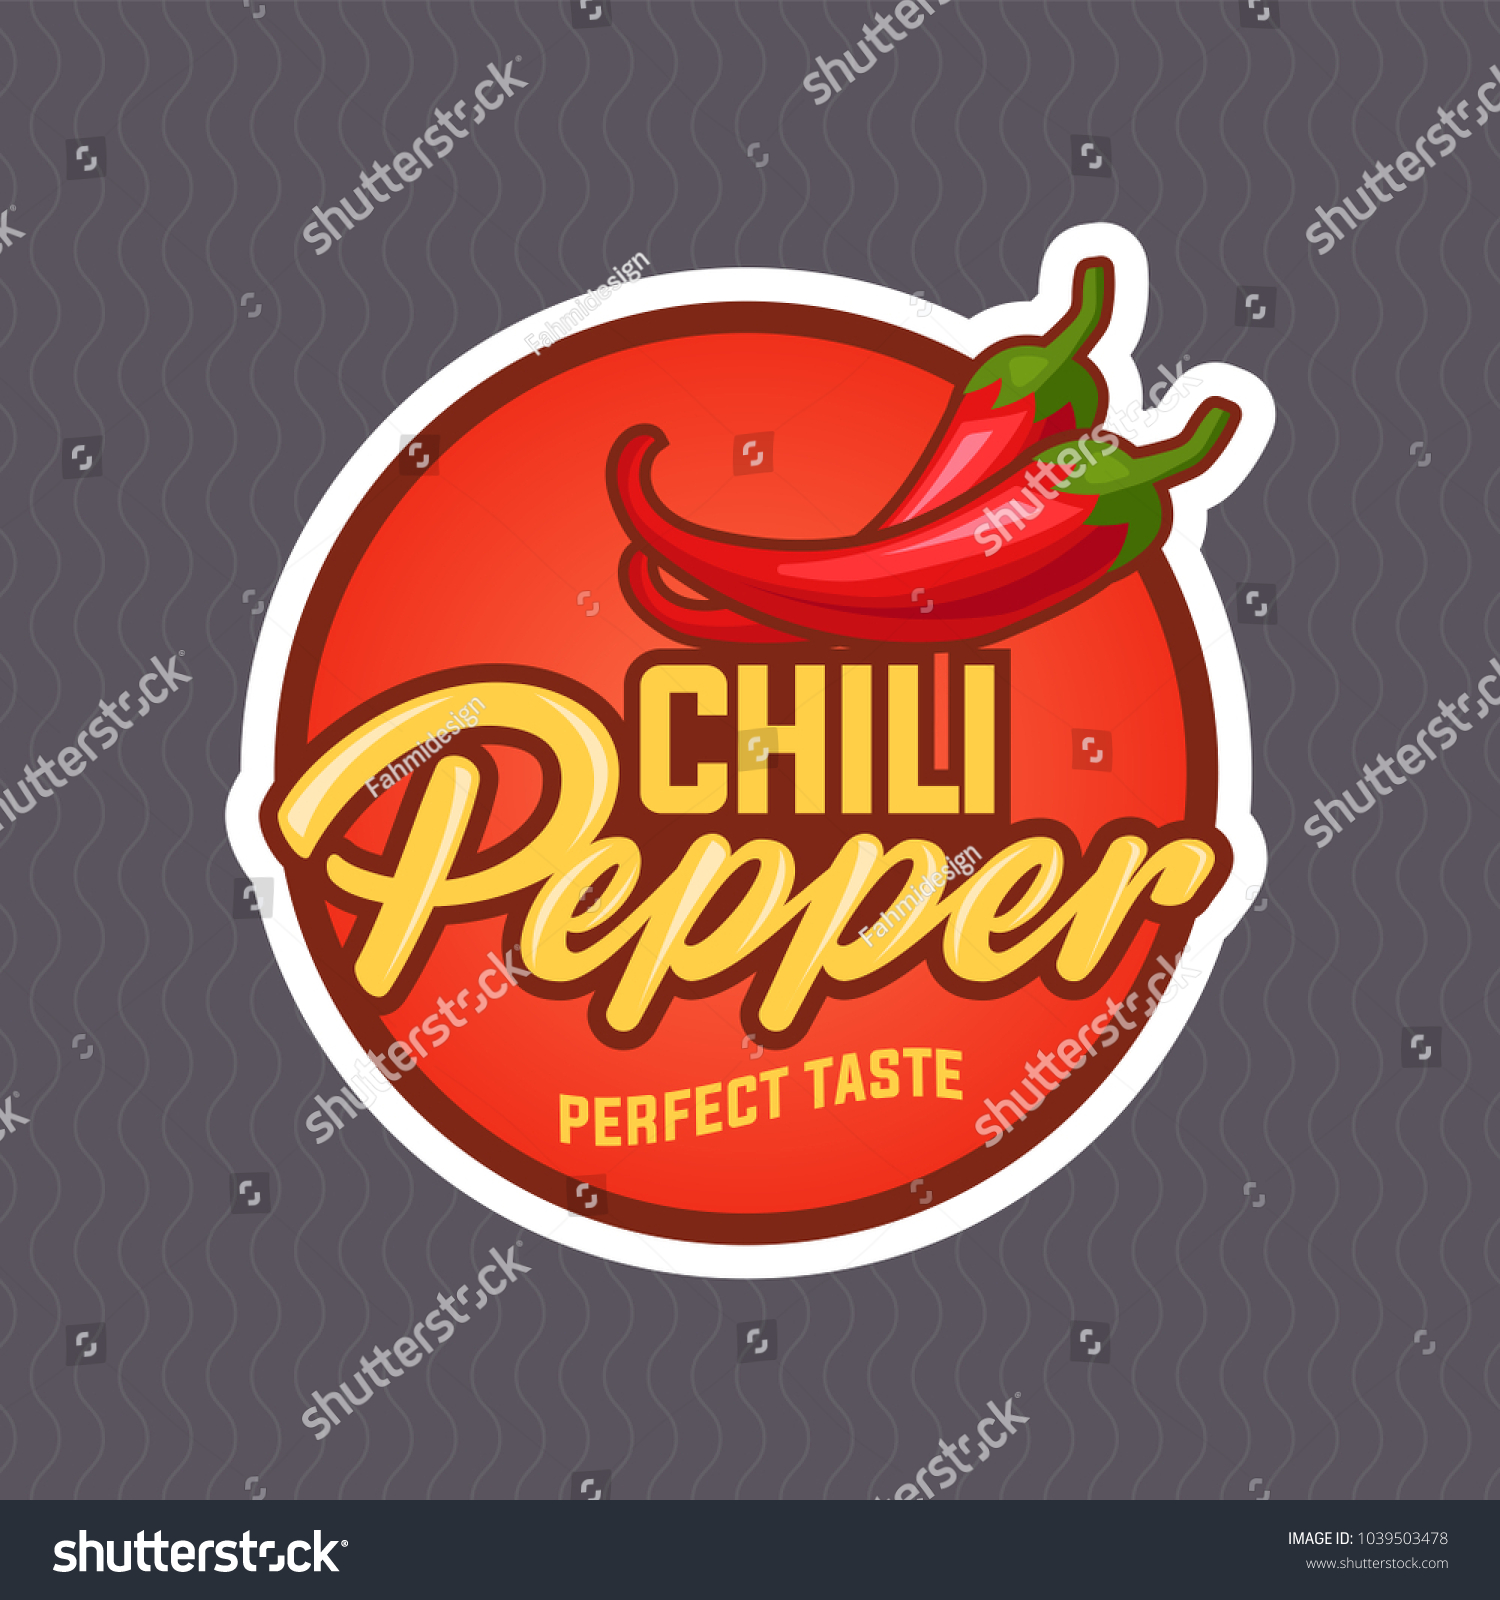 5,720 Chili Sticker Images, Stock Photos & Vectors | Shutterstock